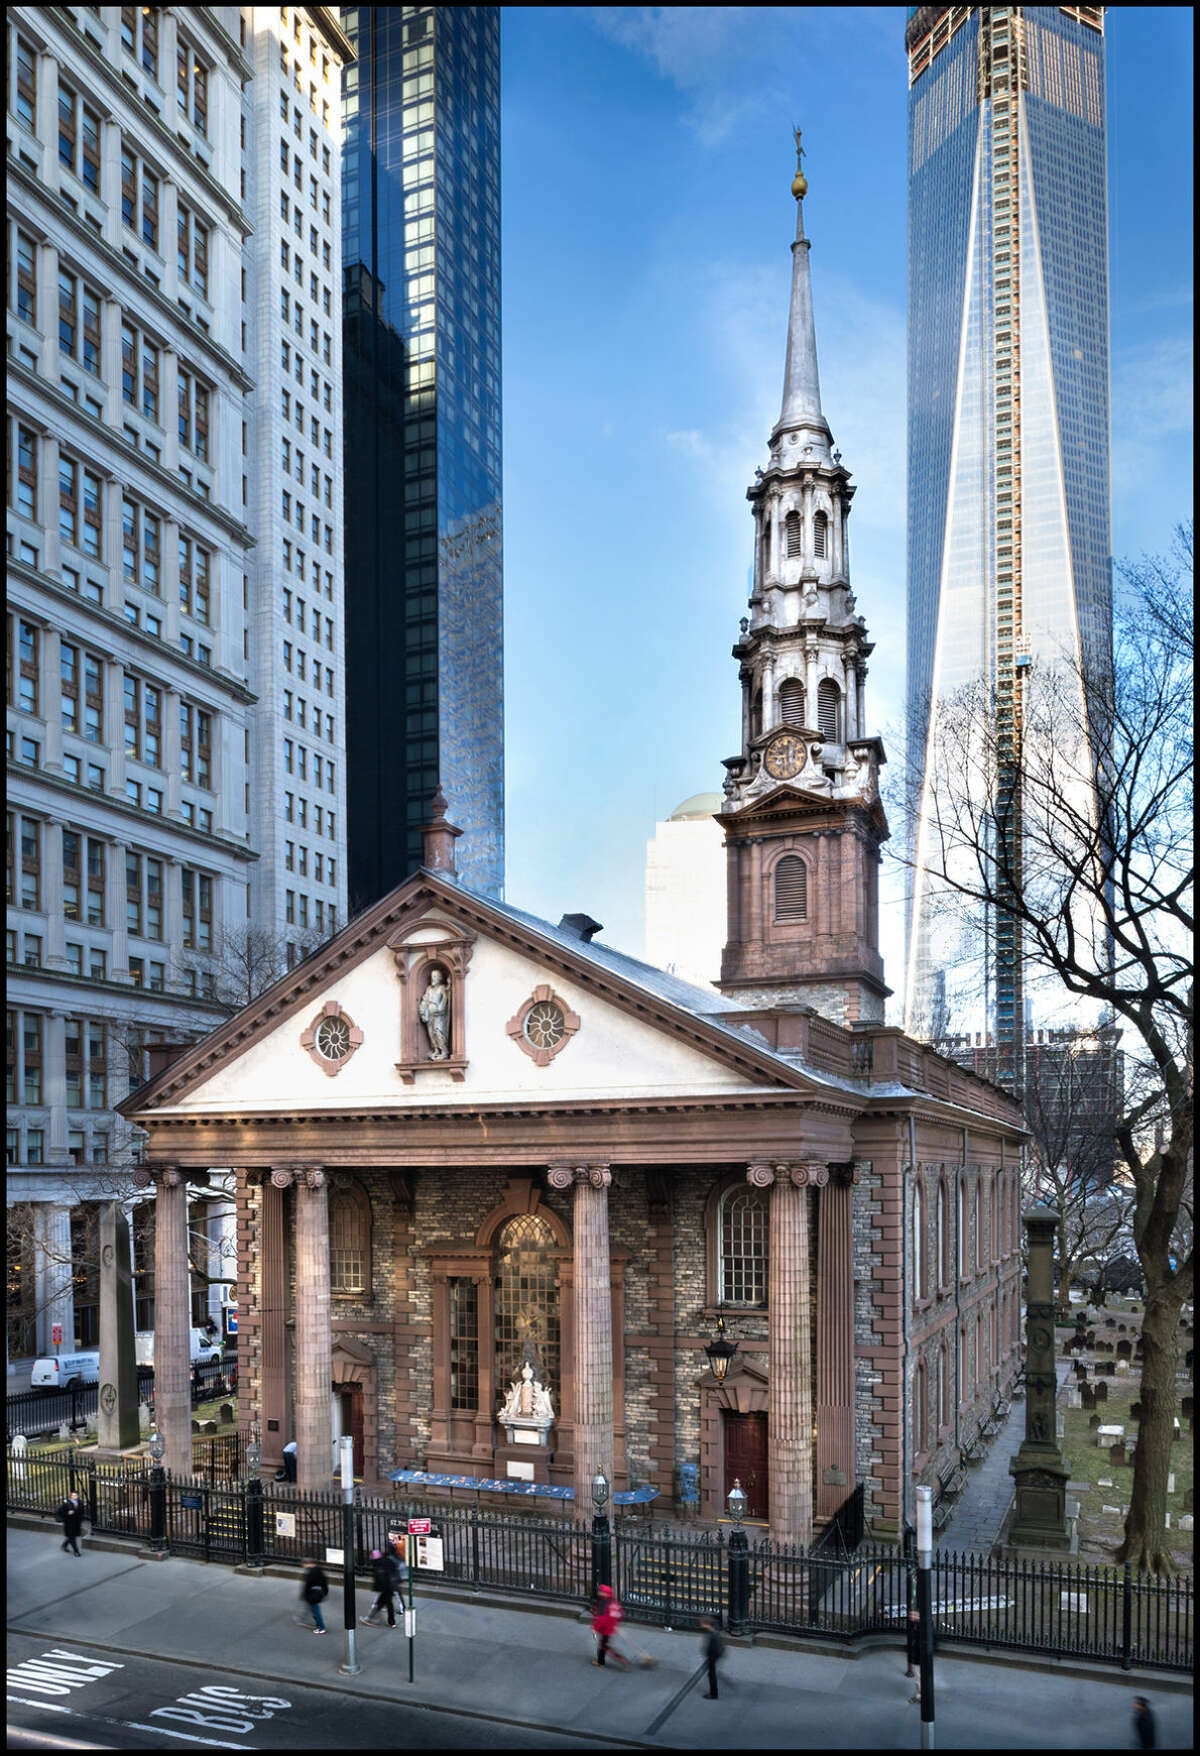 St. Paul’s Chapel is the oldest surviving church building in New York City and was a site of rest and respite for first responders and recovery workers for eight months after 9/11.